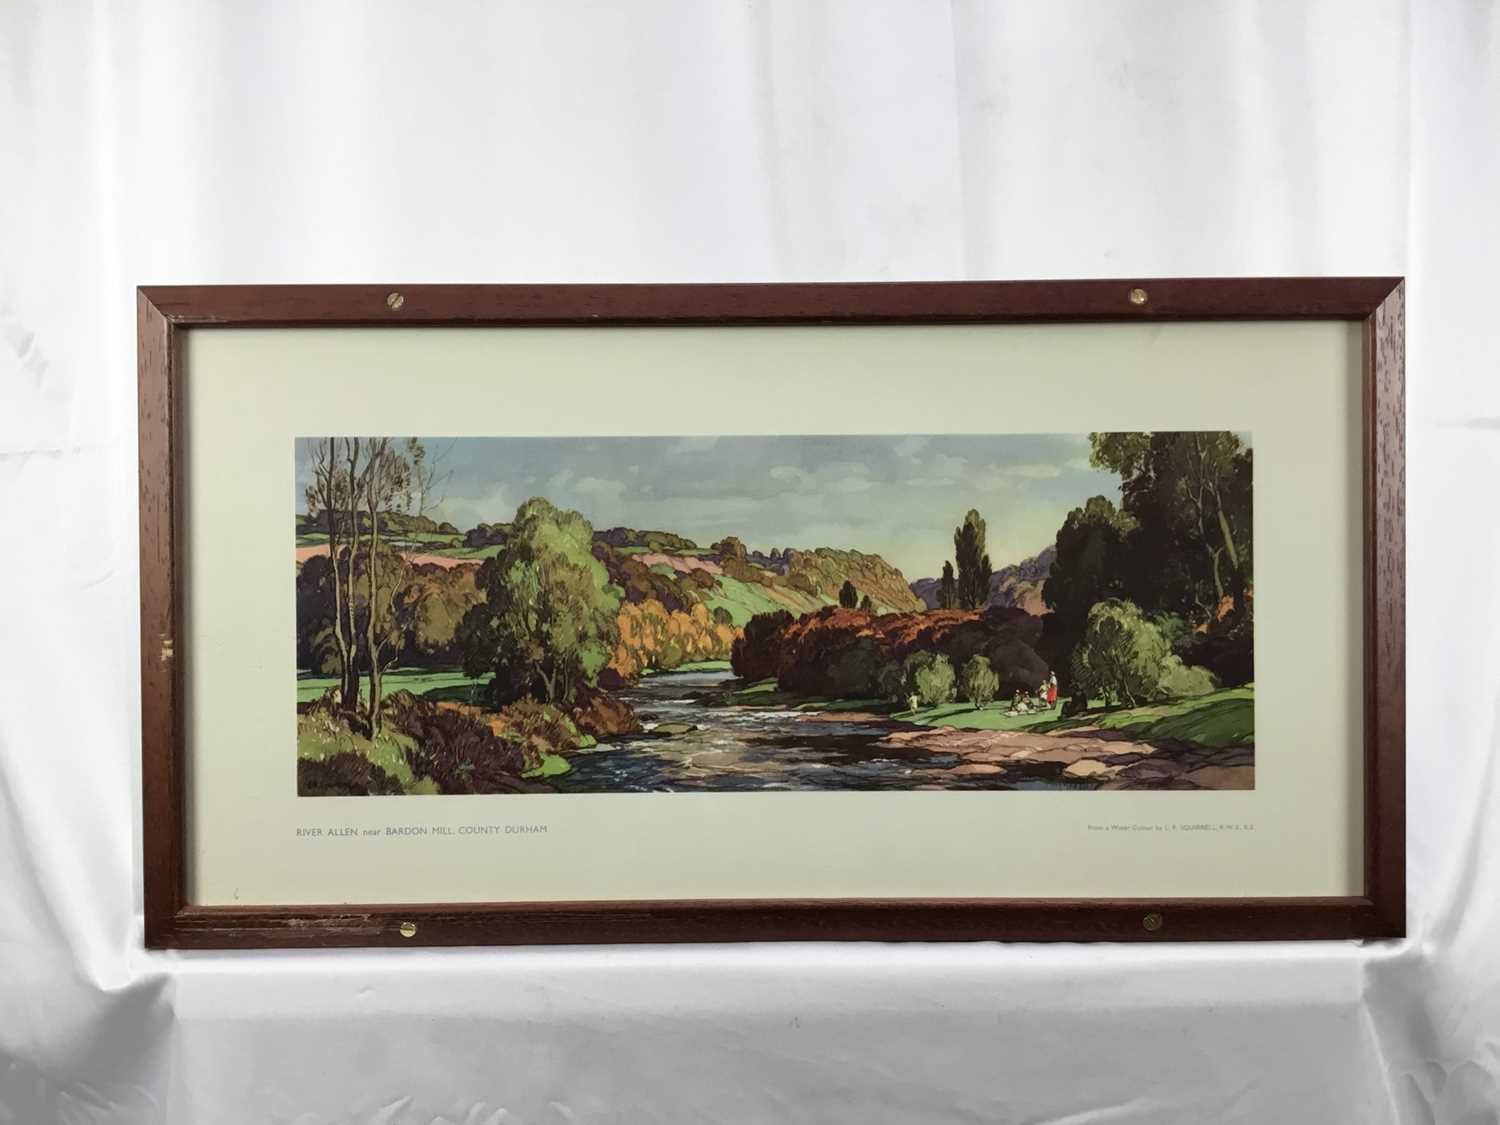 Original Railway Carriage Print/ Poster: "RIVER ALLEN, BARDON MILL, (NORTHUMBERLAND)”. Artwork by Le - Image 2 of 7